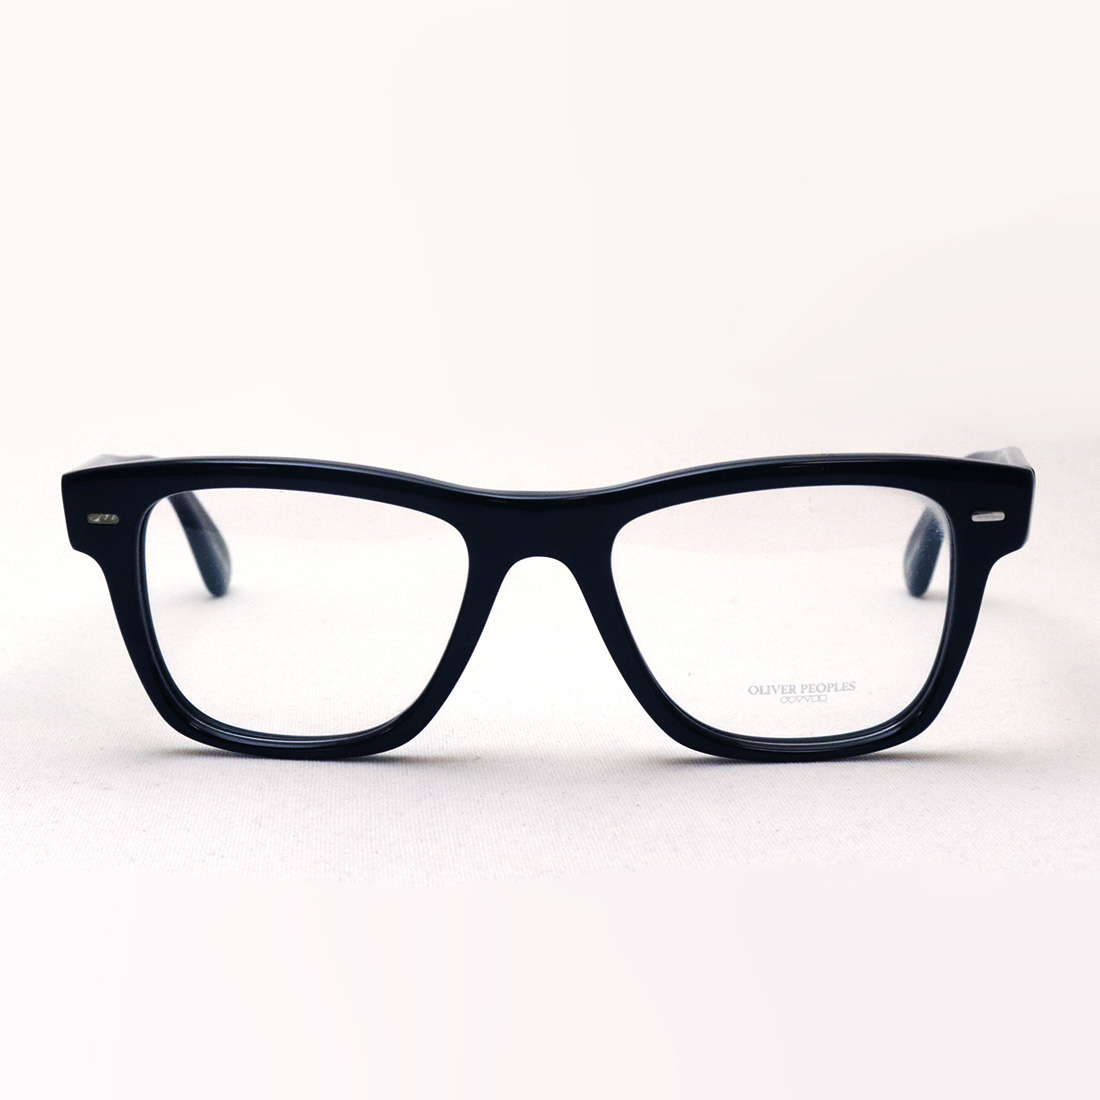 OLIVER PEOPLES OV5393F 1492 51 Oliver 伊達メガネ 度付き ブルー